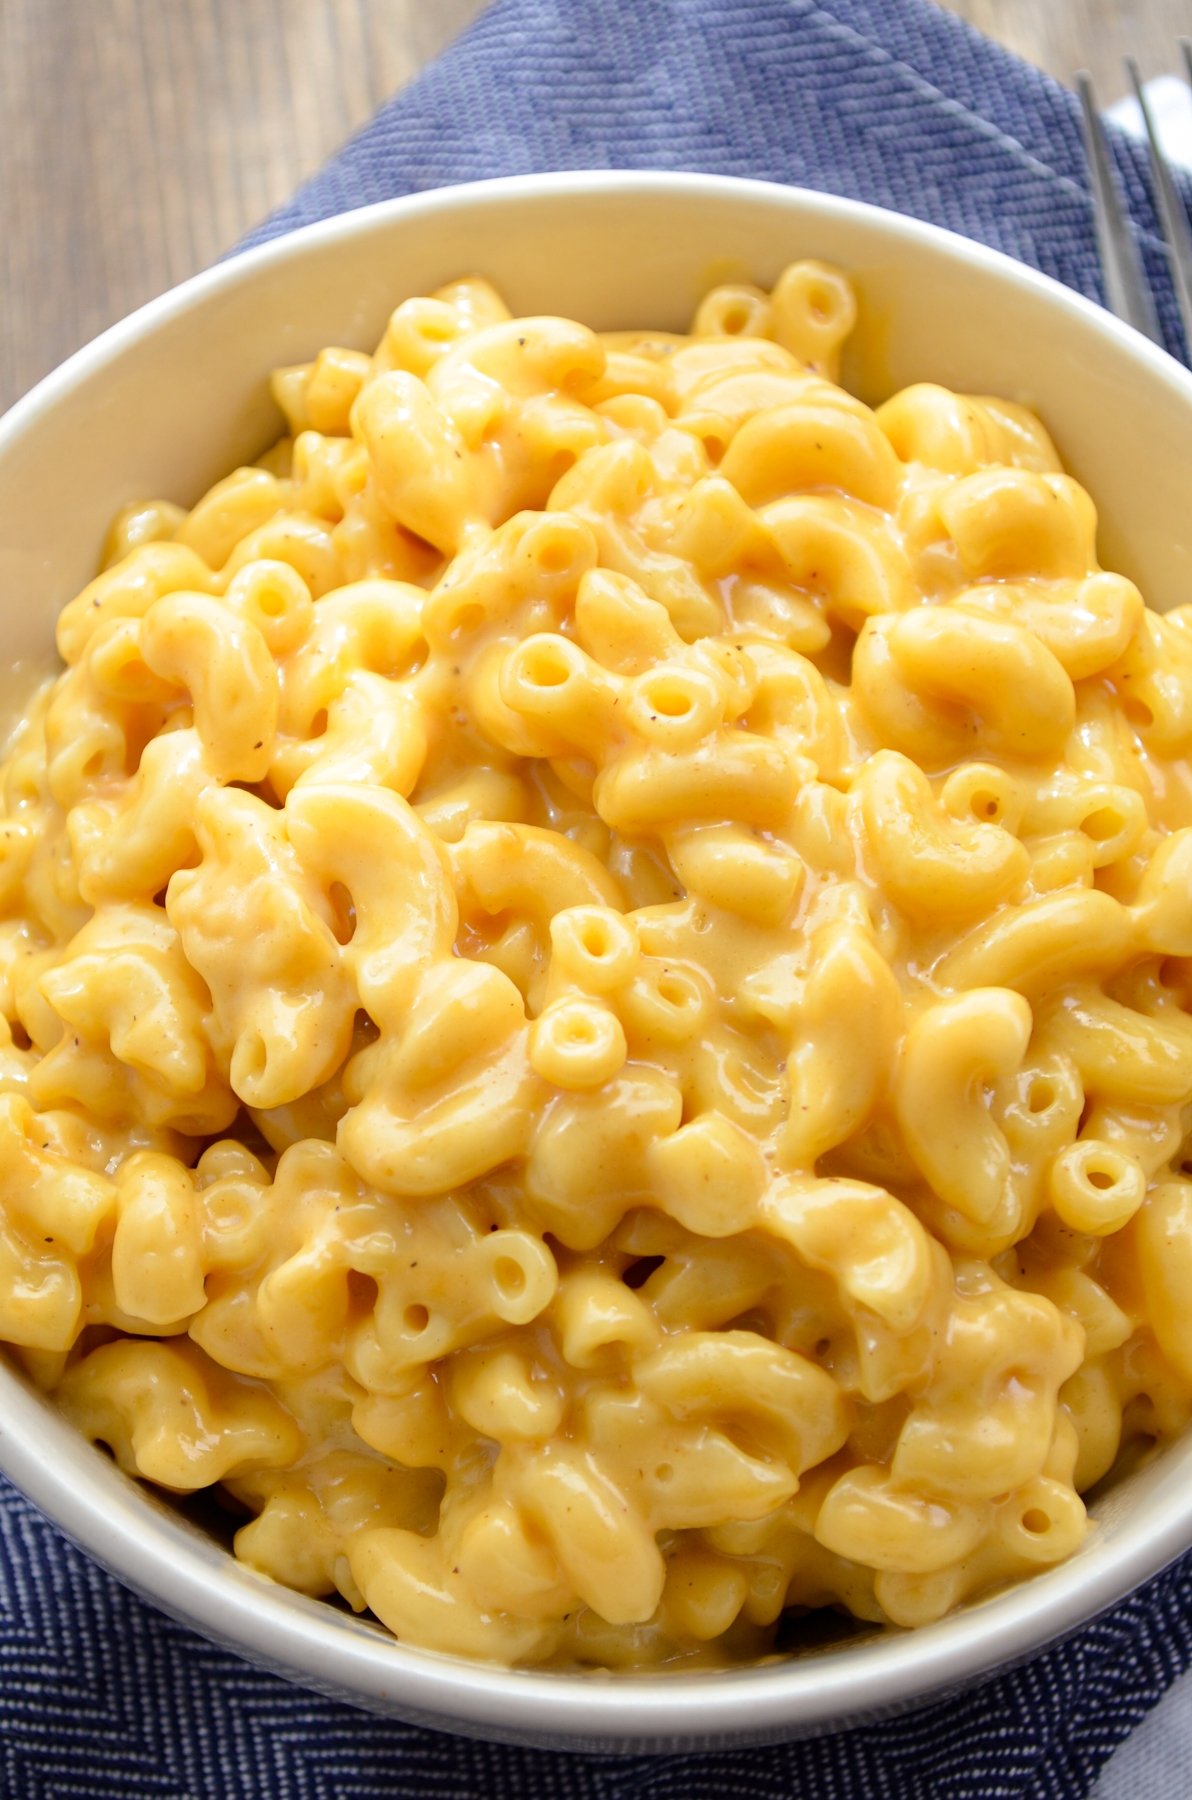 A bowl of macaroni and cheese, made in the Instant Pot.